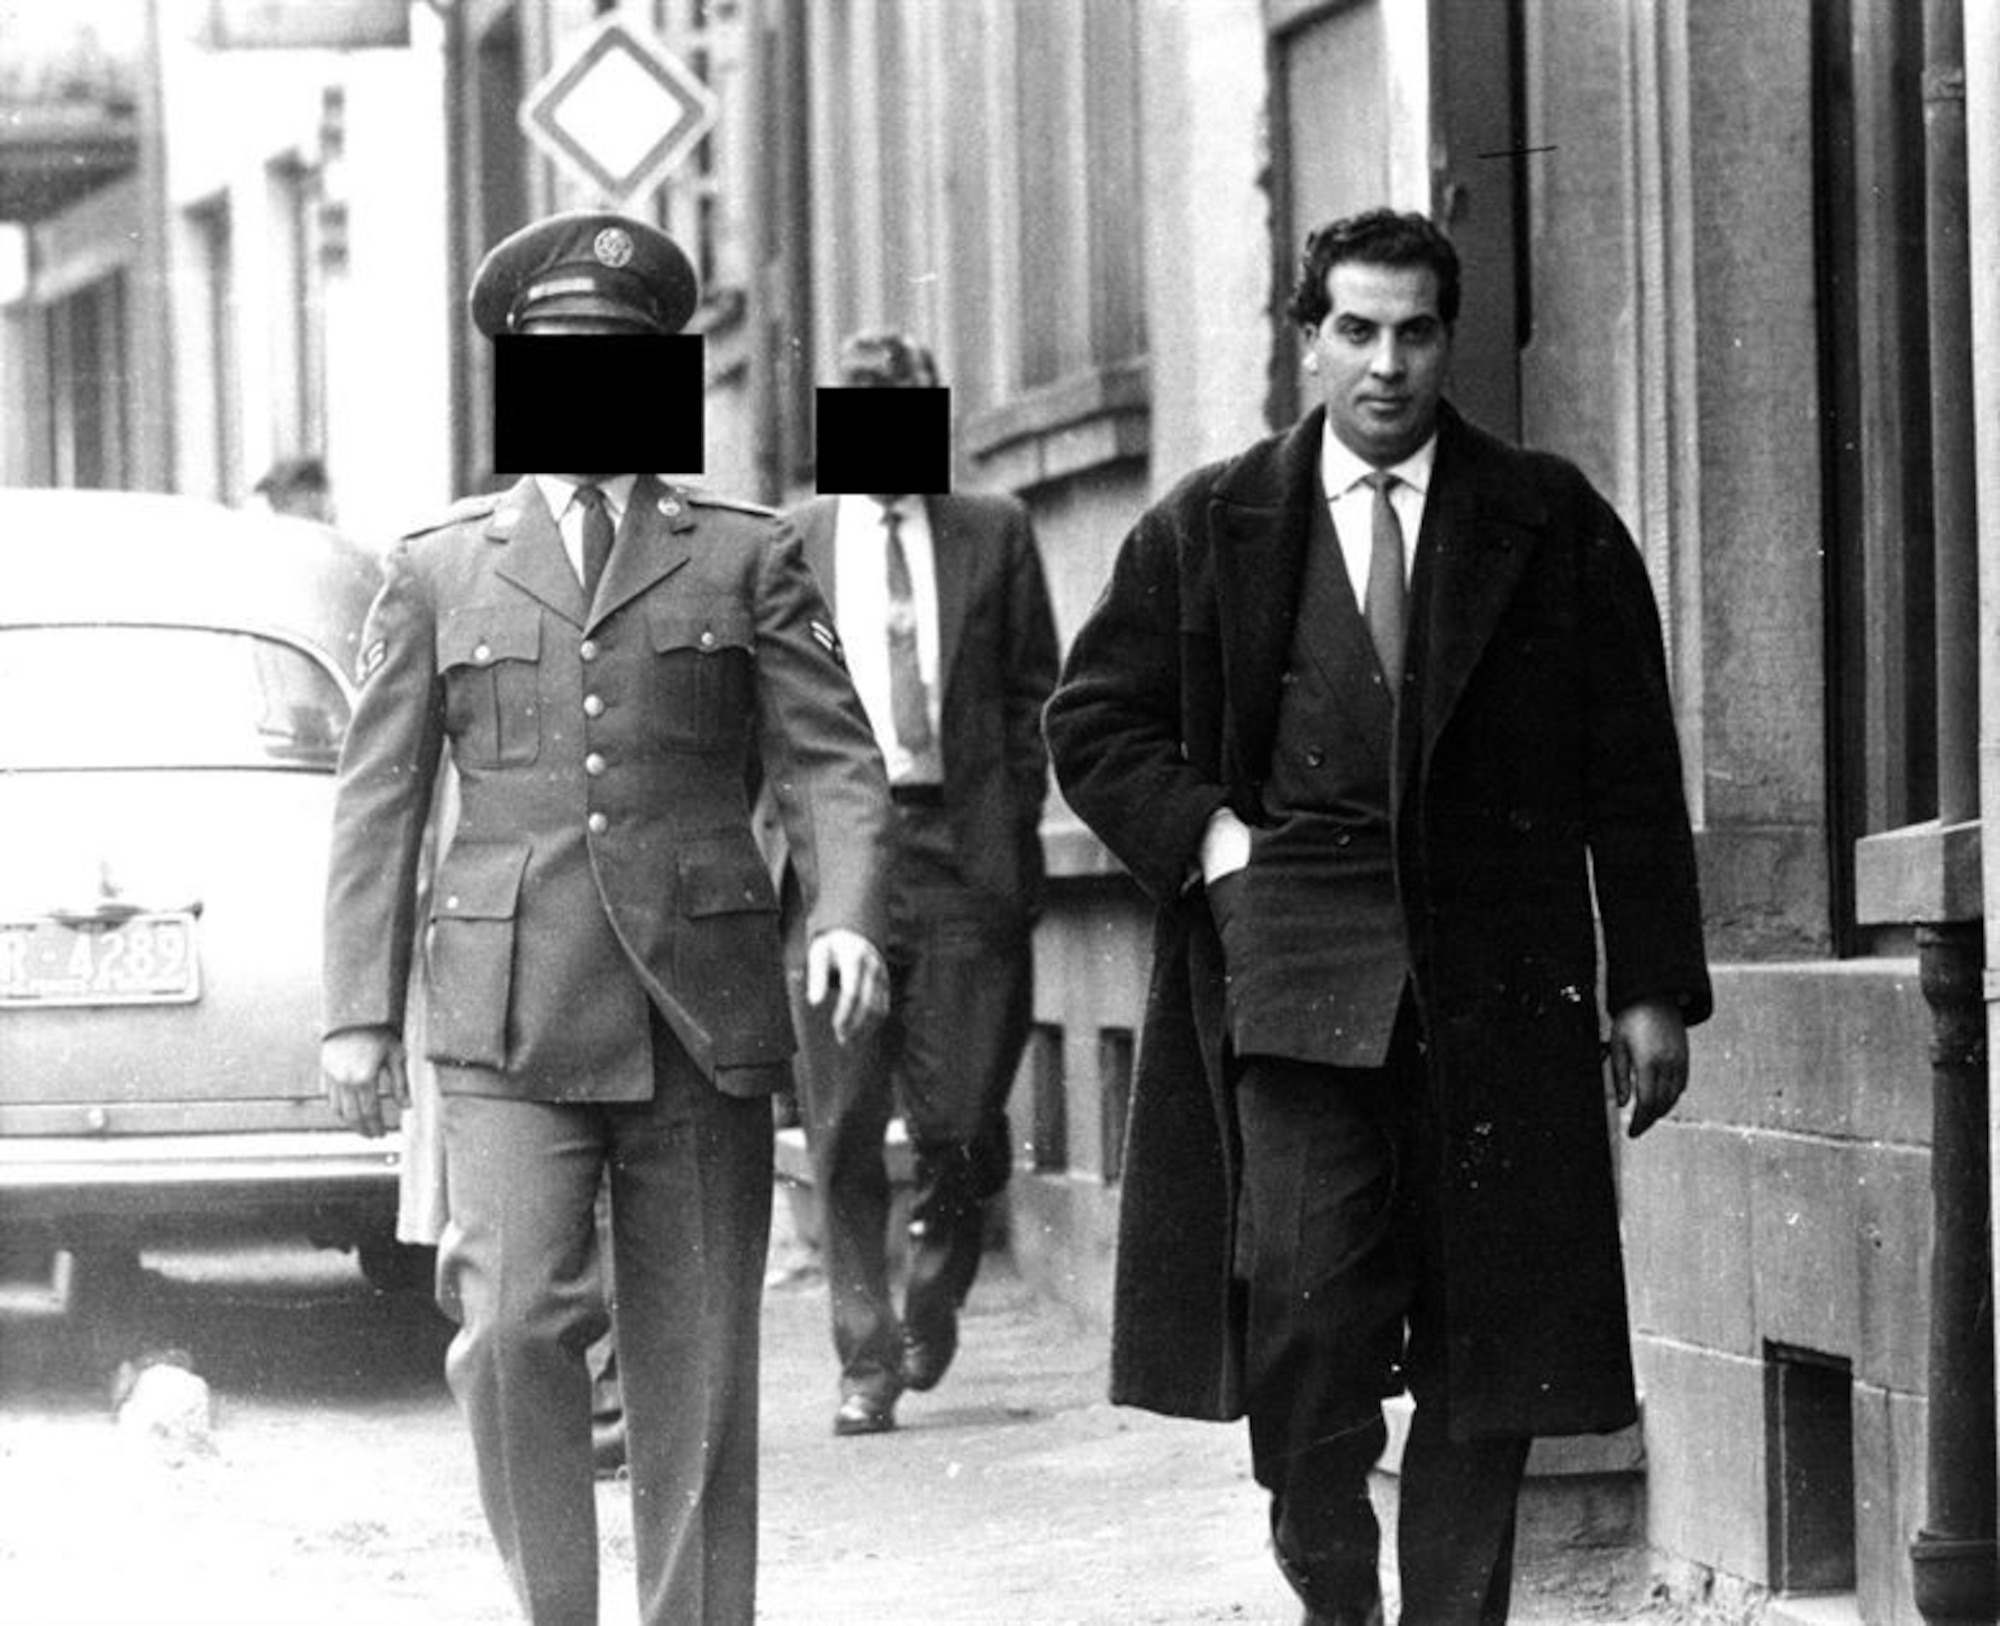 In 1959, an Algerian terrorist (right) claimed to be a member of the Front de la Libération Nationale (FLN) and attempted to purchase machine guns and pistols from the U.S. Airman (left), near Ramstein Air Base, Germany. The Airman alerted OSI, who in coordination with the French and German police, recorded and photographed the men throughout an investigation. The man behind the Airman is an OSI agent. (U.S. Air Force photo)